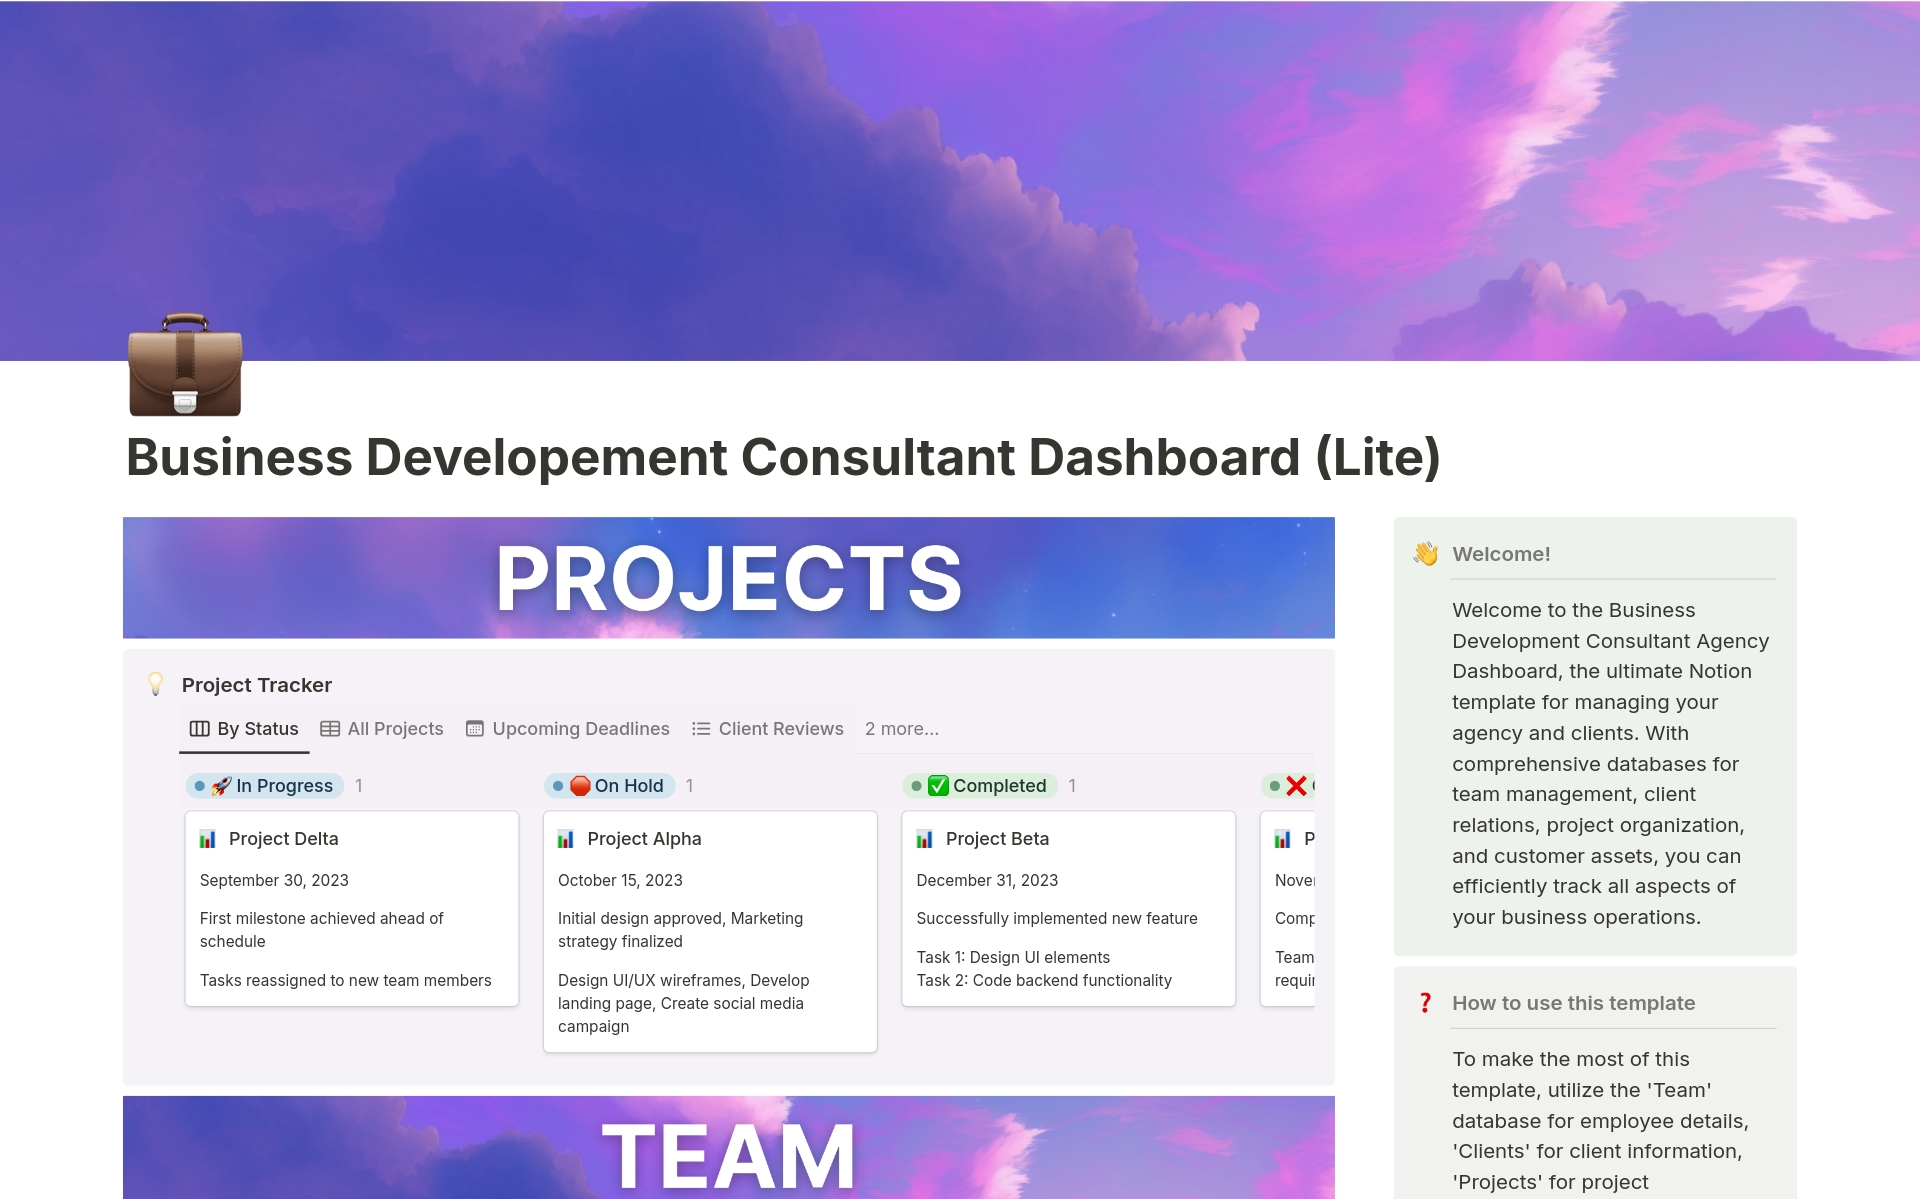 Take control of your agency's operations with the Business Development Consultant Dashboard (Lite). Manage projects, clients, and teams seamlessly to boost productivity and client satisfaction.
